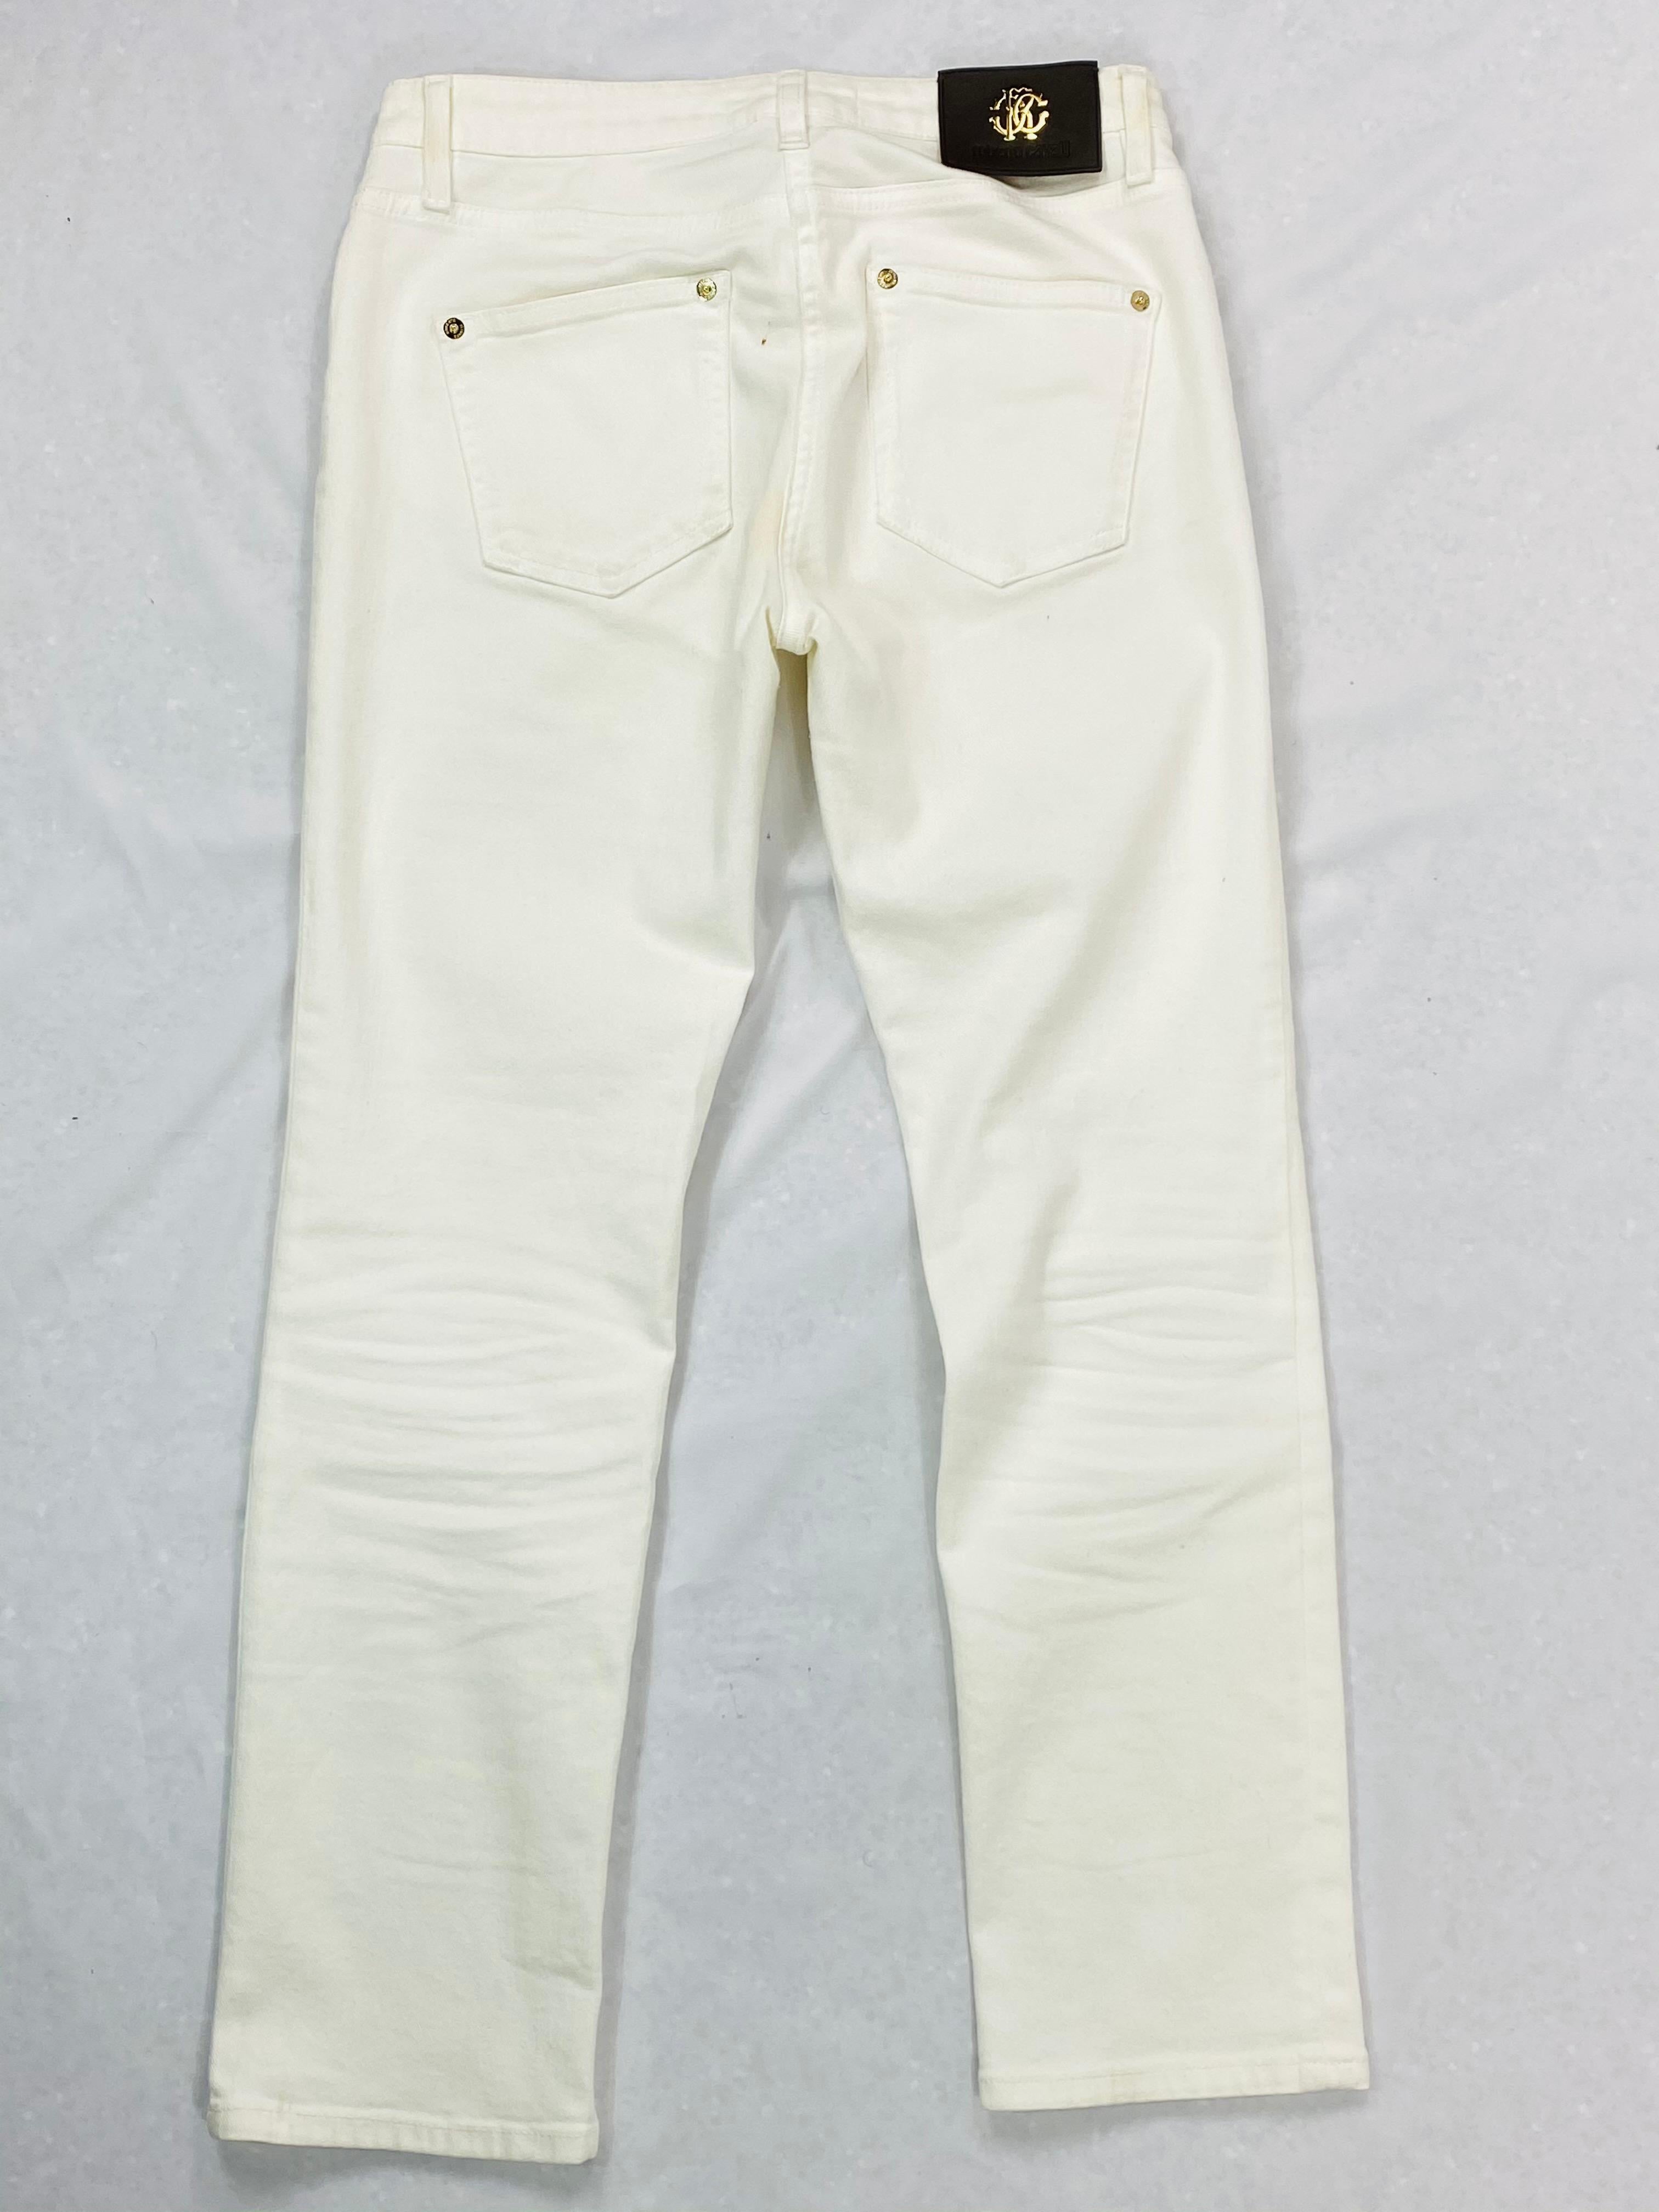 Roberto Cavalli White Denim Jeans Pants, Size 42 In Good Condition For Sale In Beverly Hills, CA